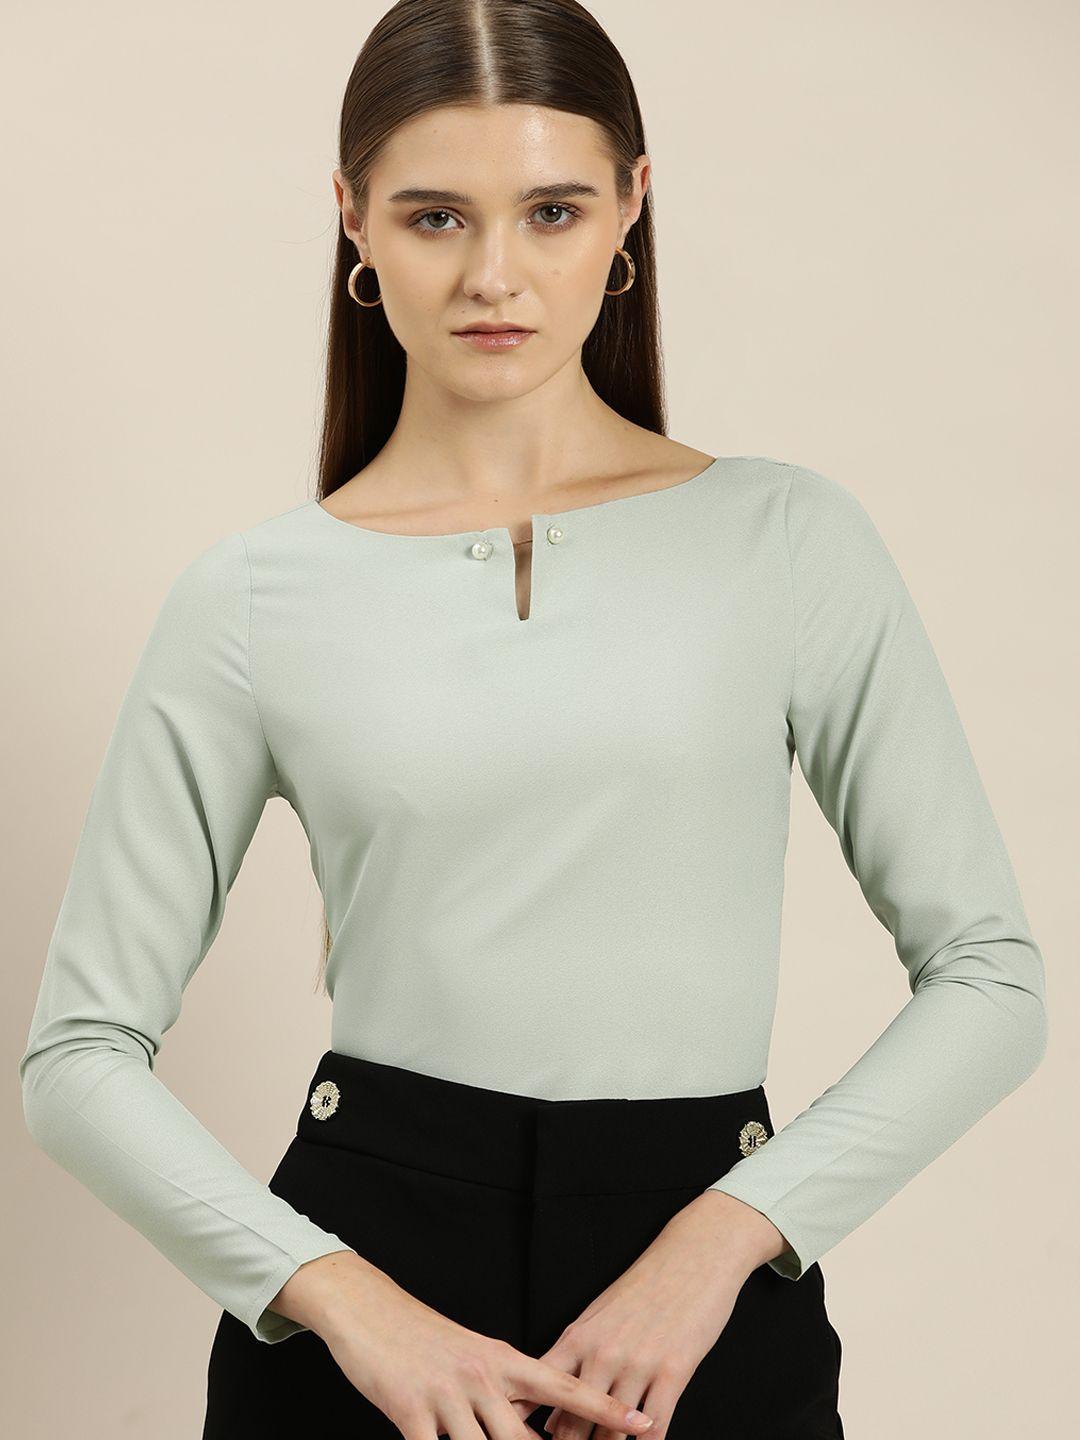 her-by-invictus-pearl-broach-detail-keyhole-neck-regular-top